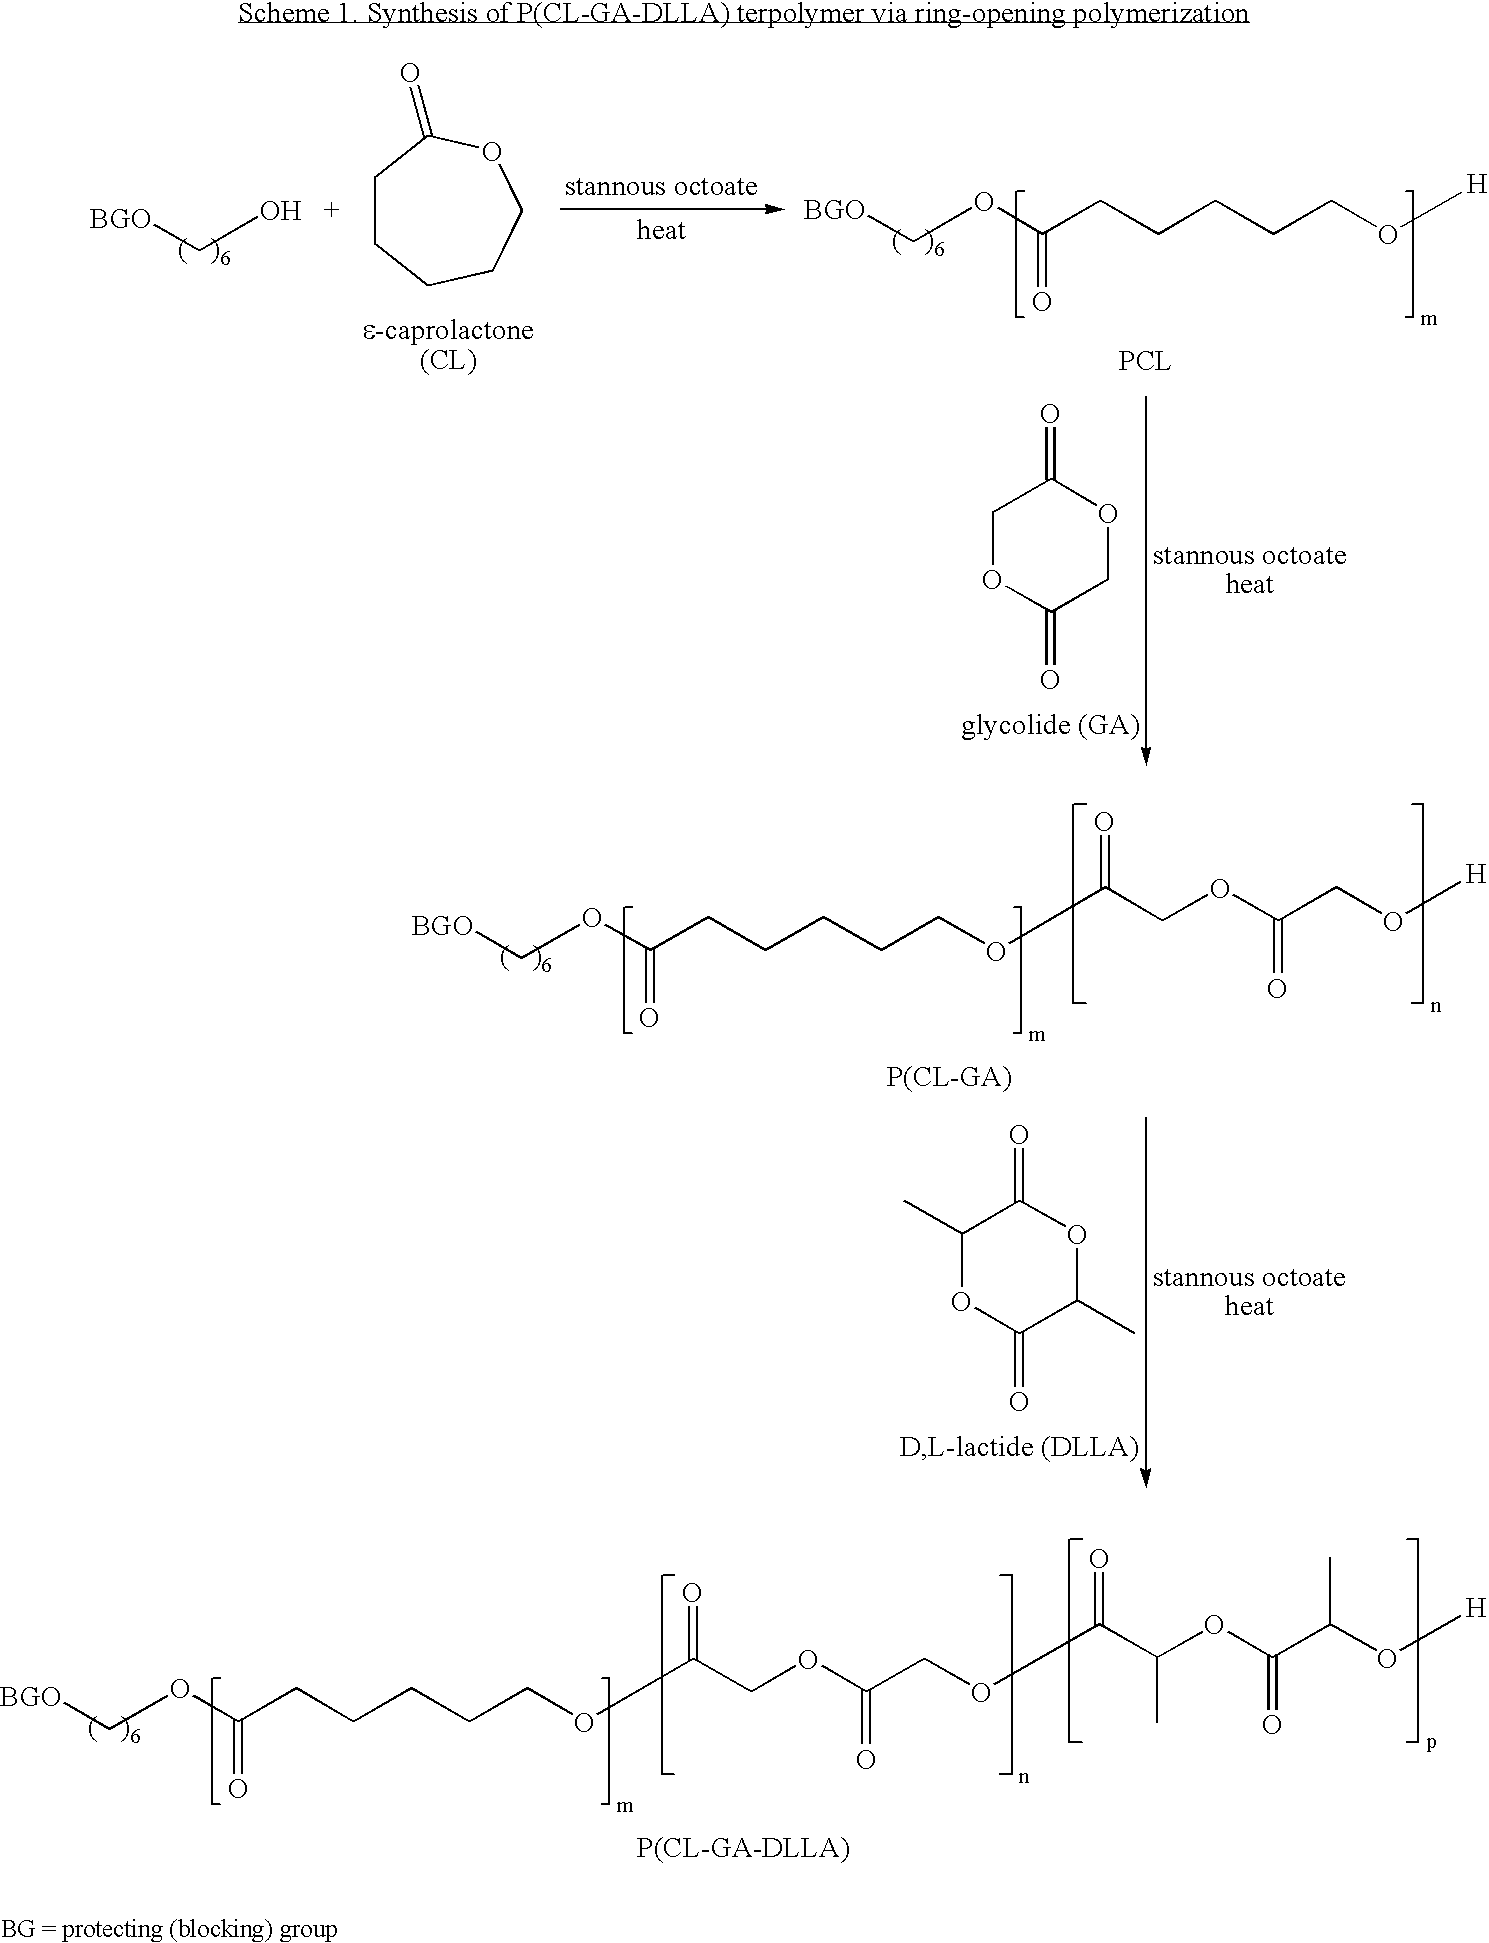 Biodegradable polymeric materials providing controlled release of hydrophobic drugs from implantable devices